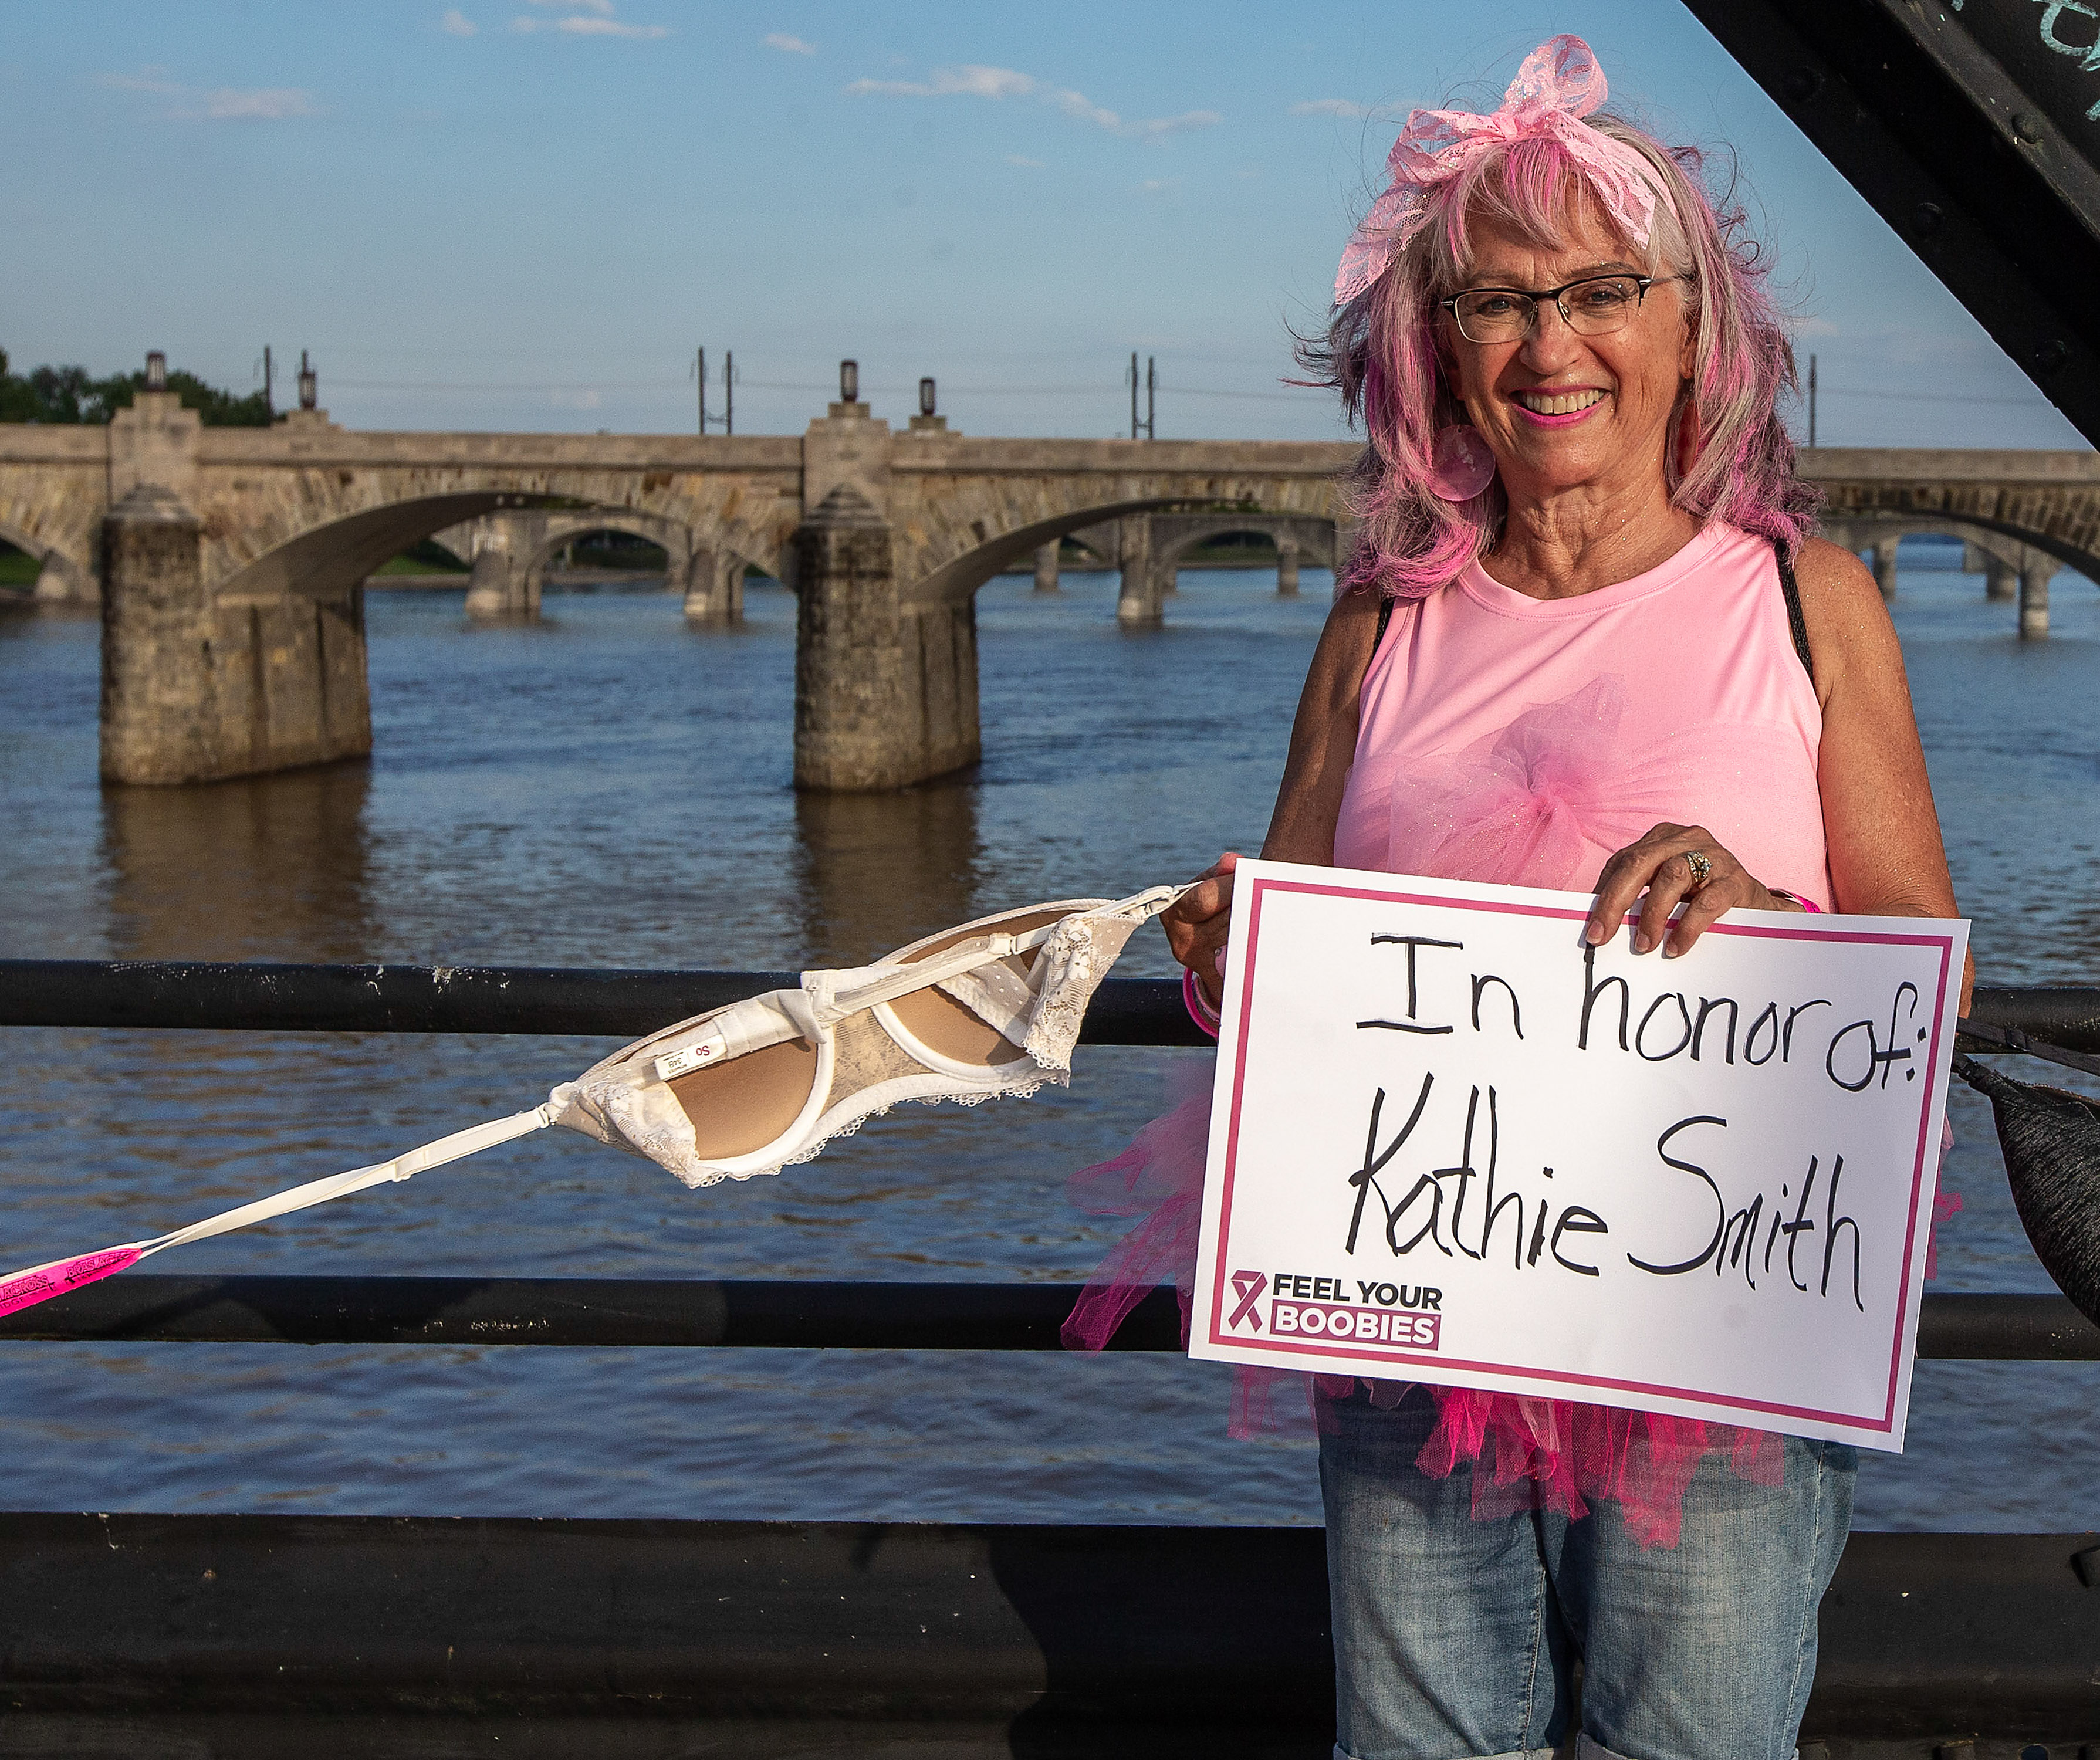 Bras on the Bridge' campaign helps raise breast cancer awareness